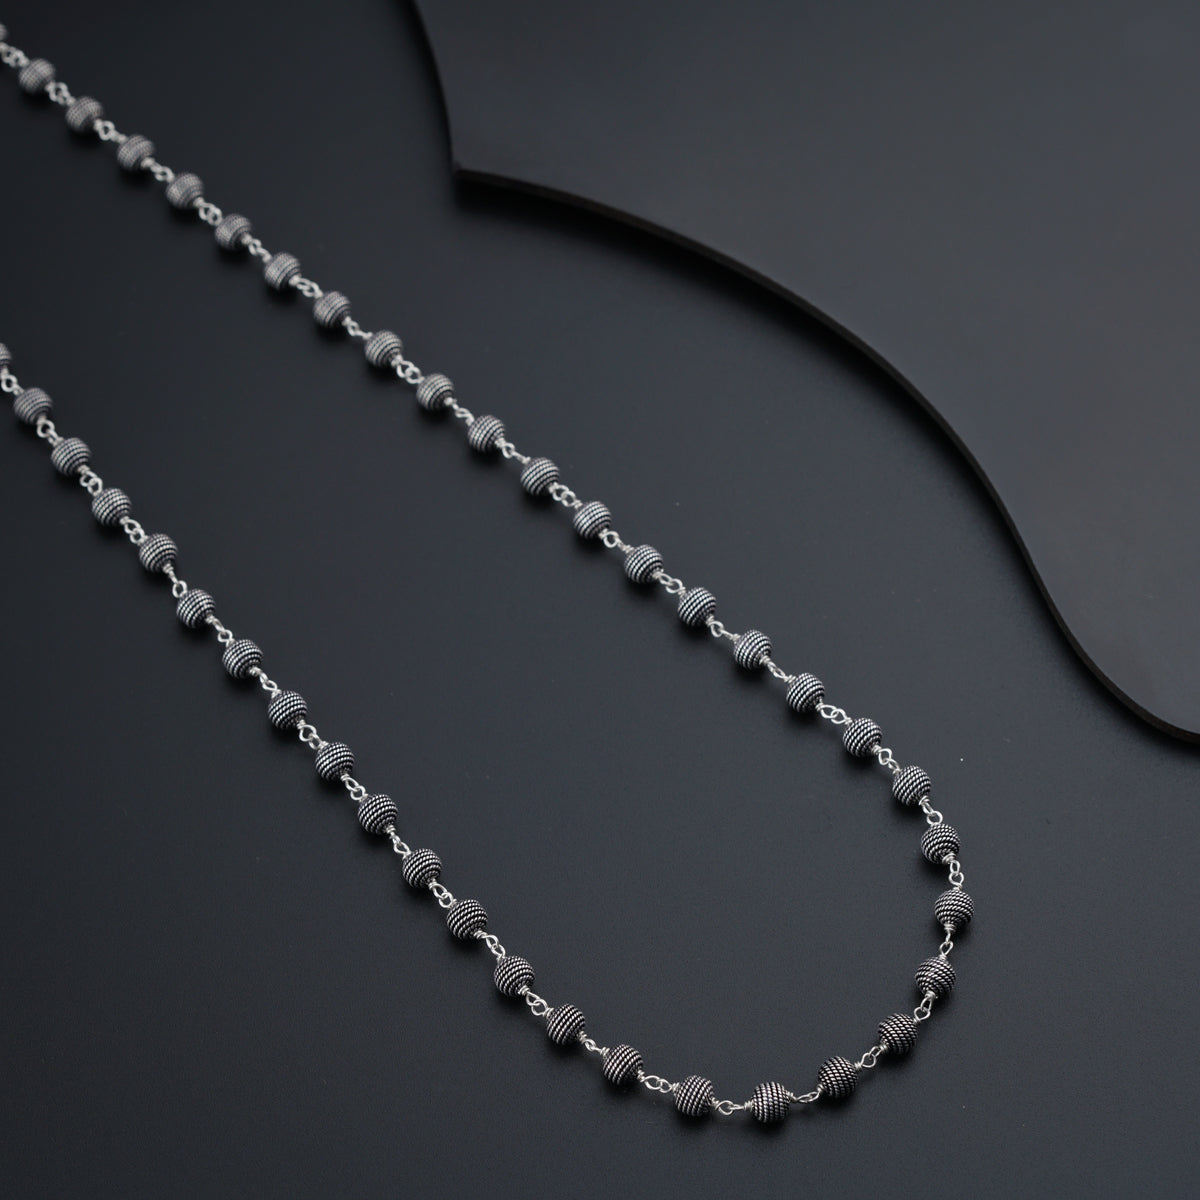 a chain of silver beads on a black surface